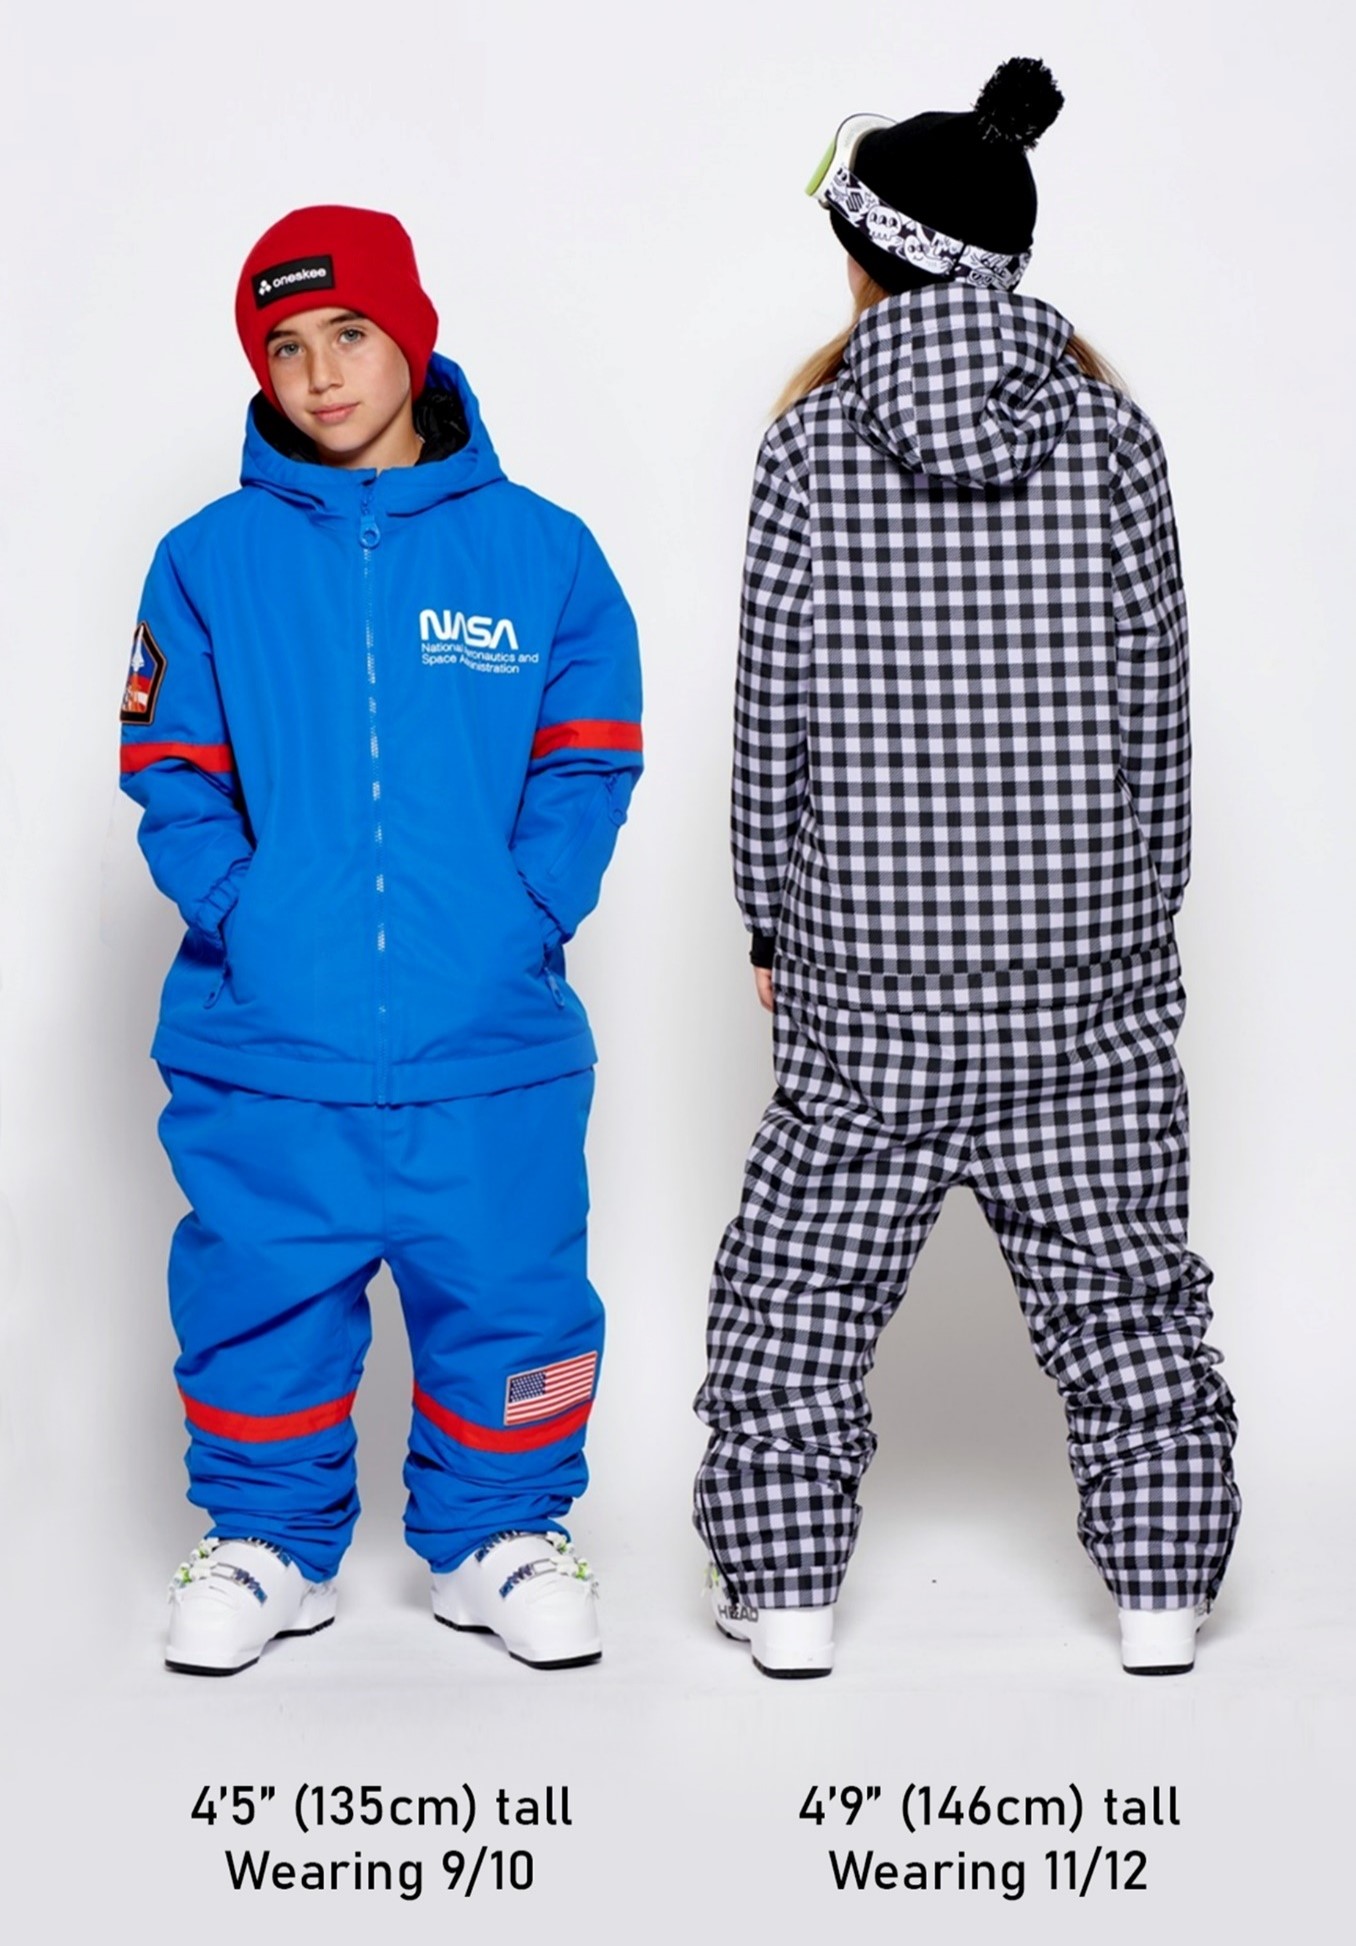 Two children modelling Ski Suits, the model on the left is 4'5" (135cm) tall Wearing 9/10. The model on the right is 4'9" (146cm) tall Wearing 11/12